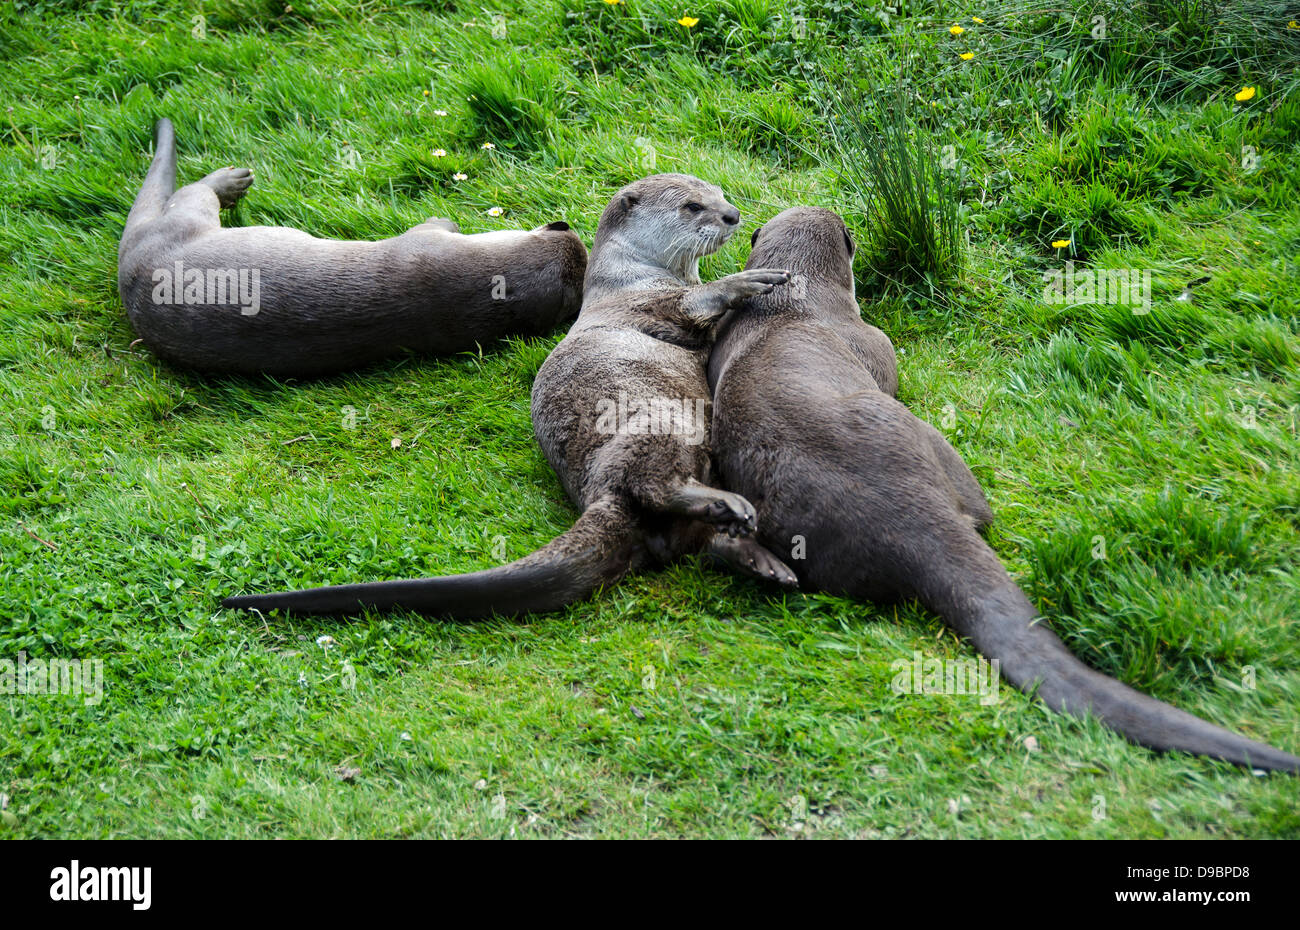 Otters at play. Stock Photo